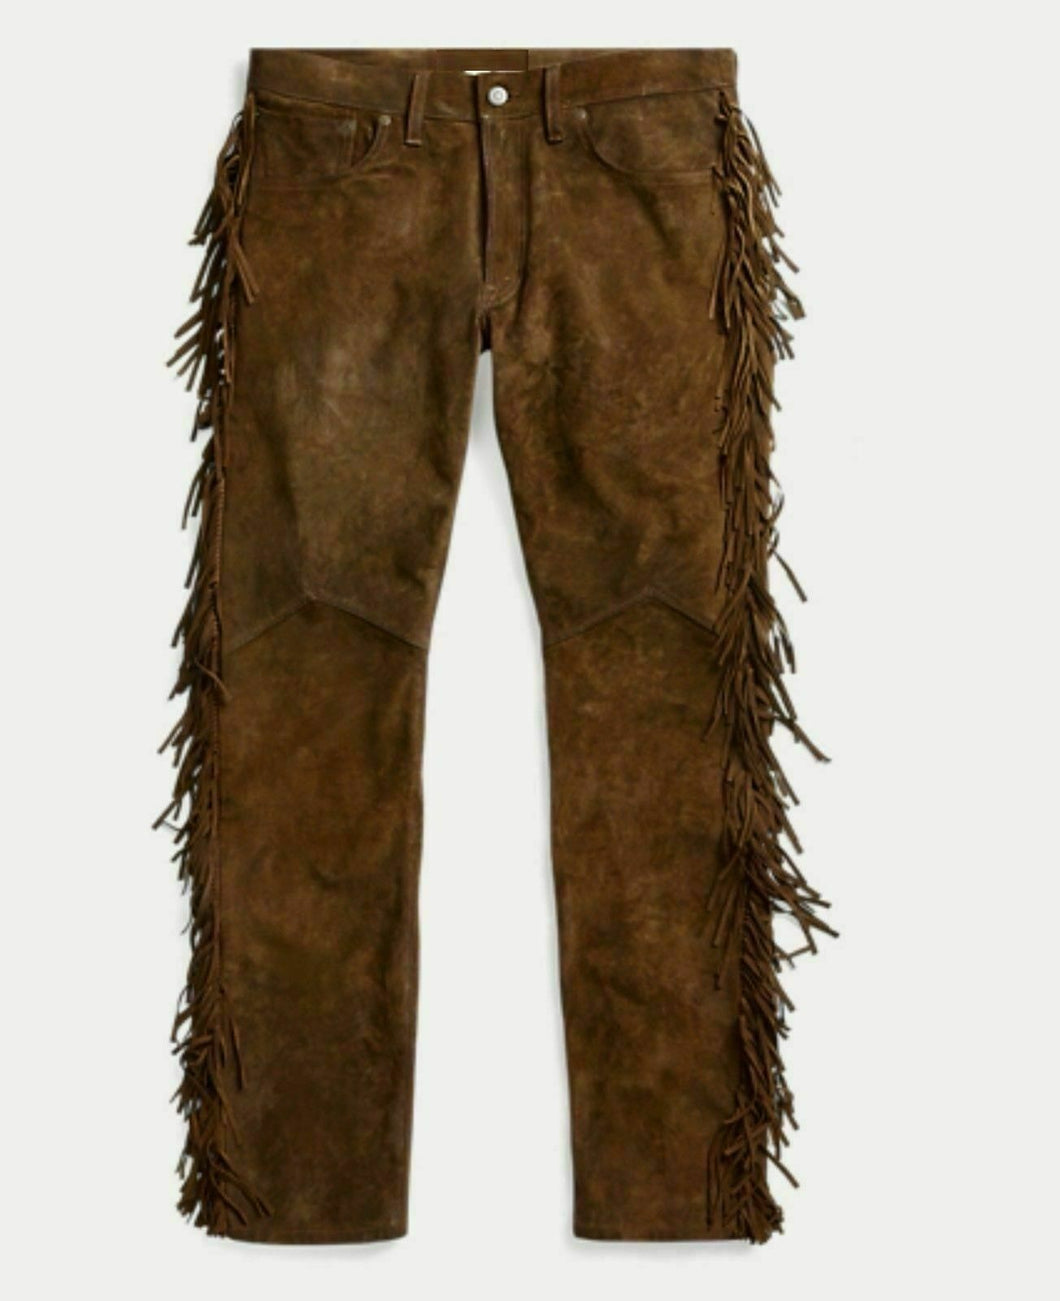 Men's Brown Suede Jeans with Fringes